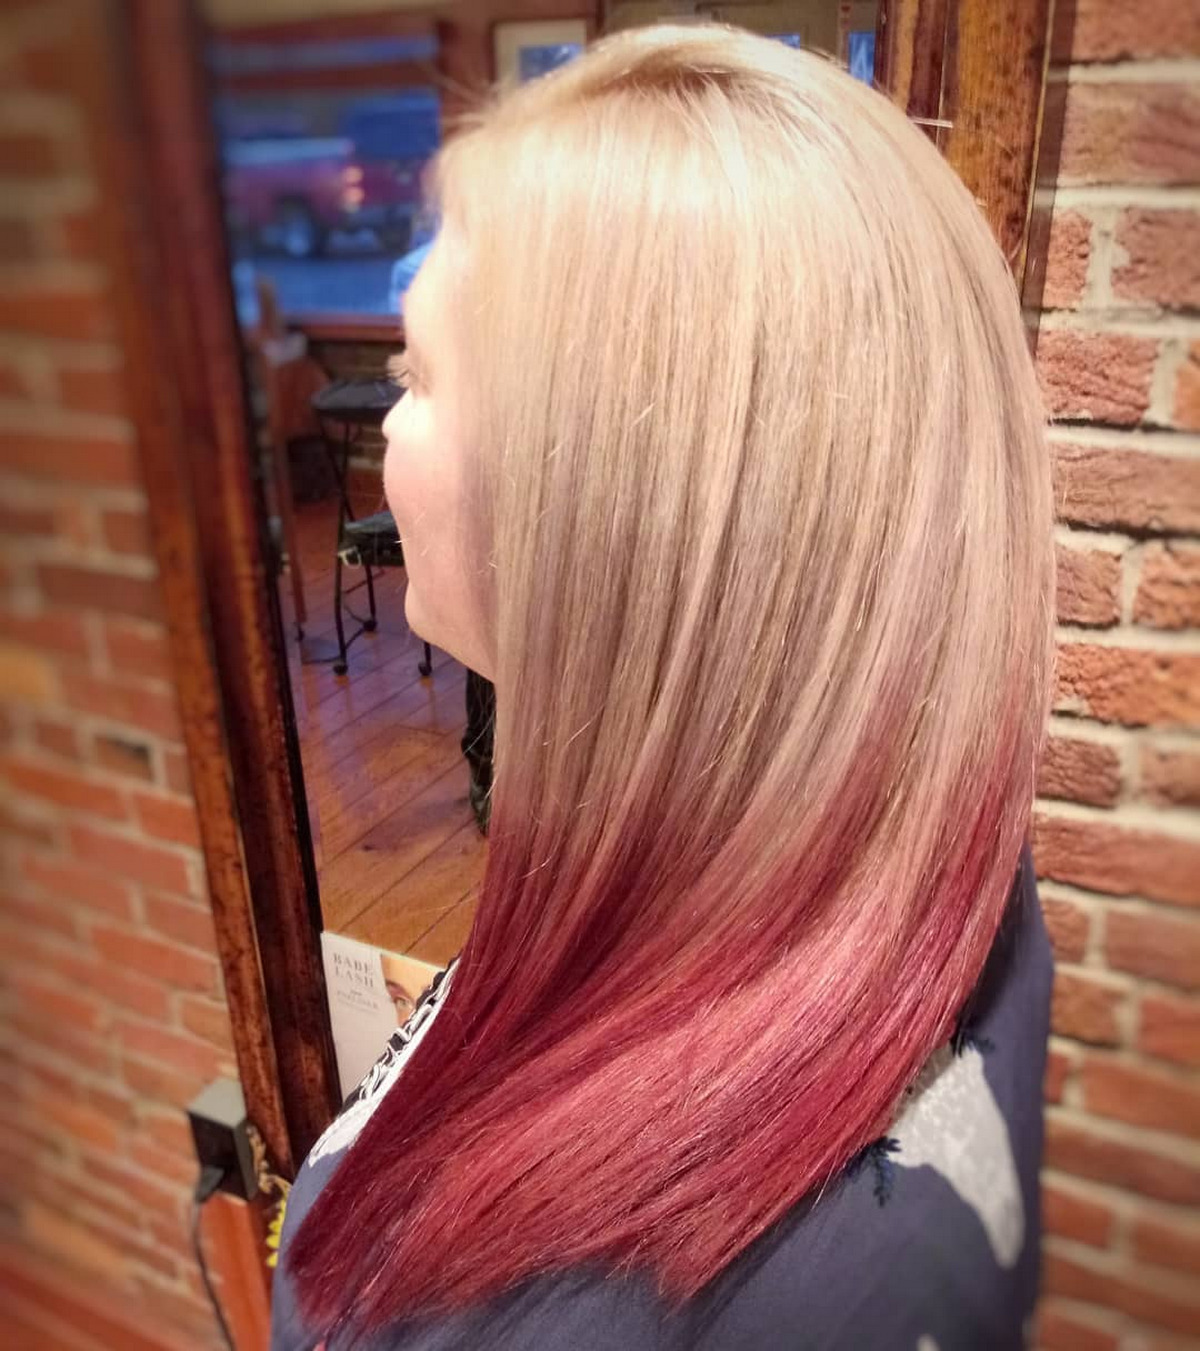 Seamless Transition Between Blonde And Red